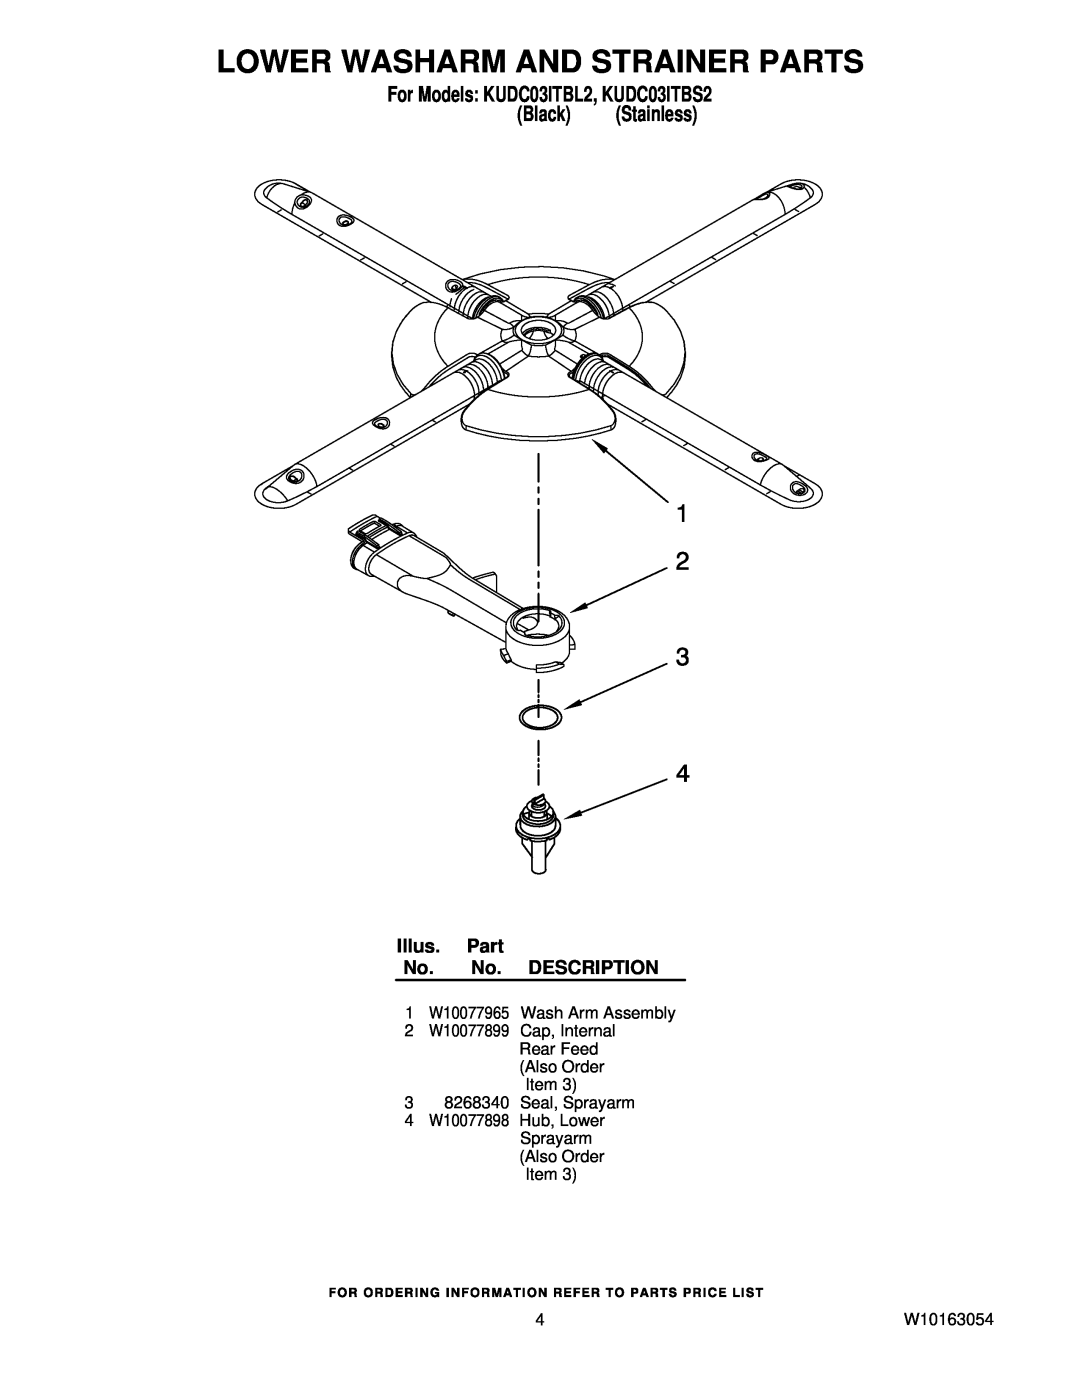 KitchenAid manual Lower Washarm And Strainer Parts, For Models KUDC03ITBL2, KUDC03ITBS2 Black Stainless, W10163054 